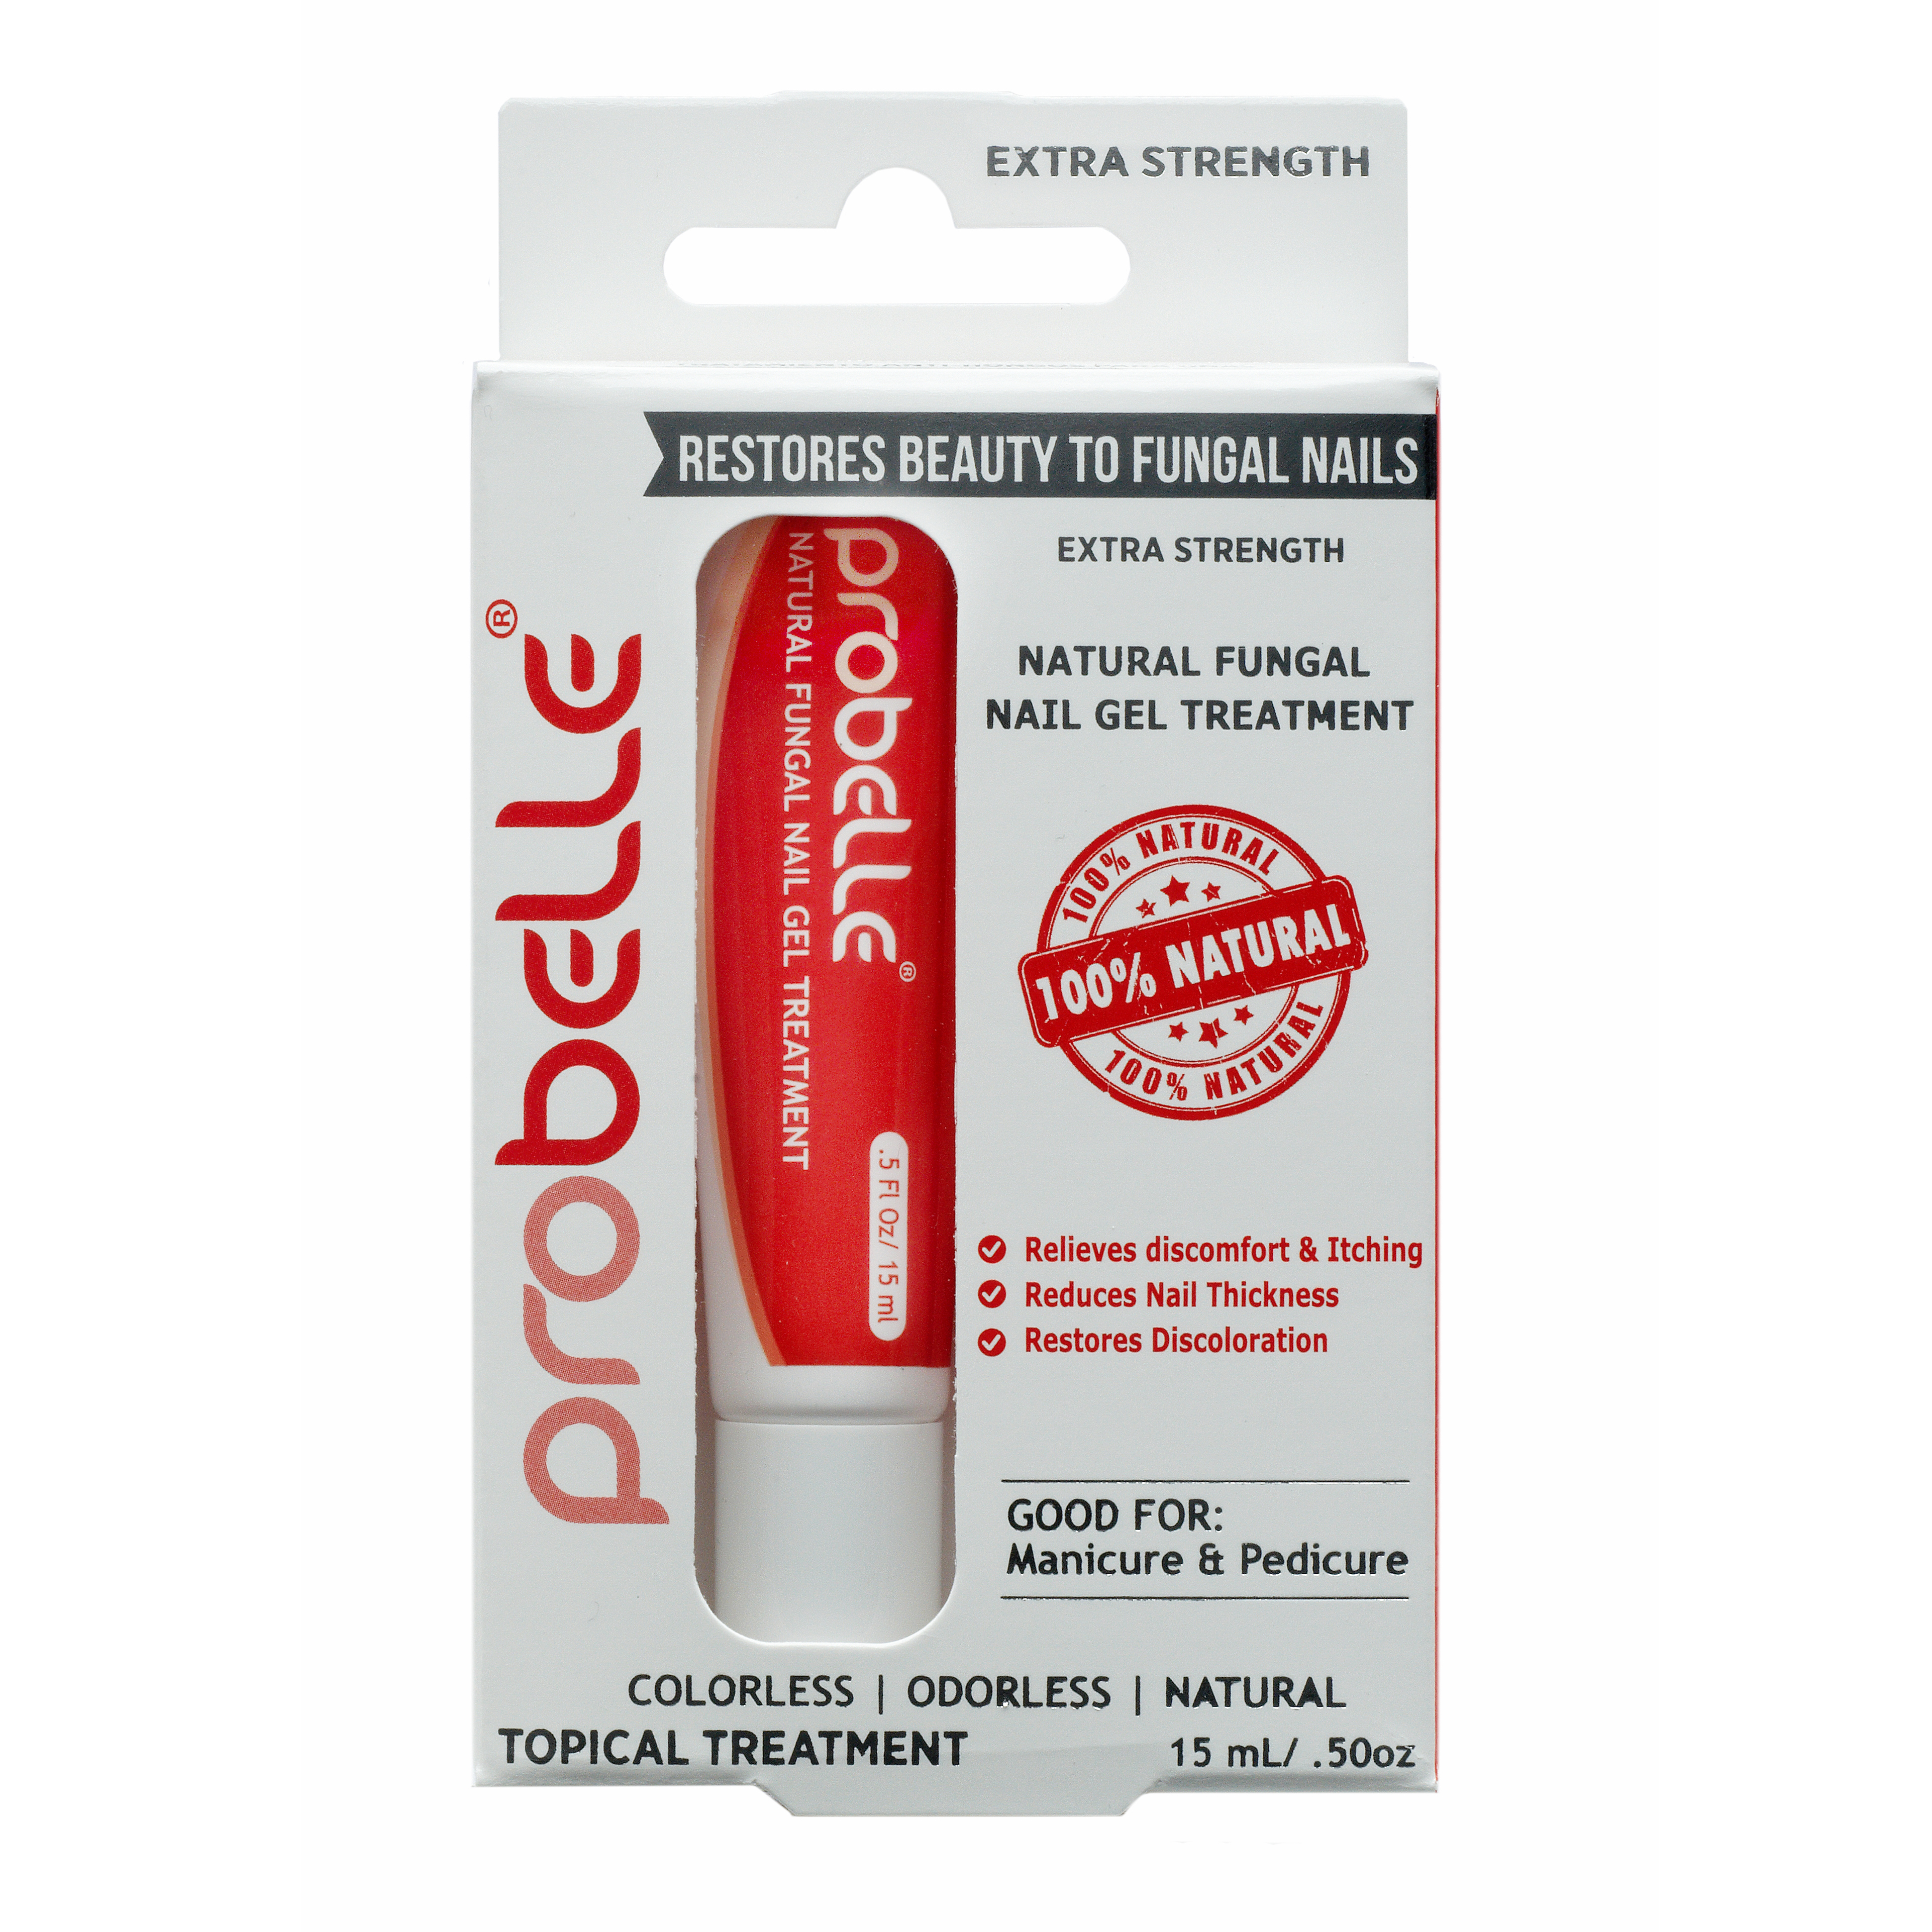 Probelle Natural Fungal Nail Gel Treatment - Extra Strength by Probelle Beauty